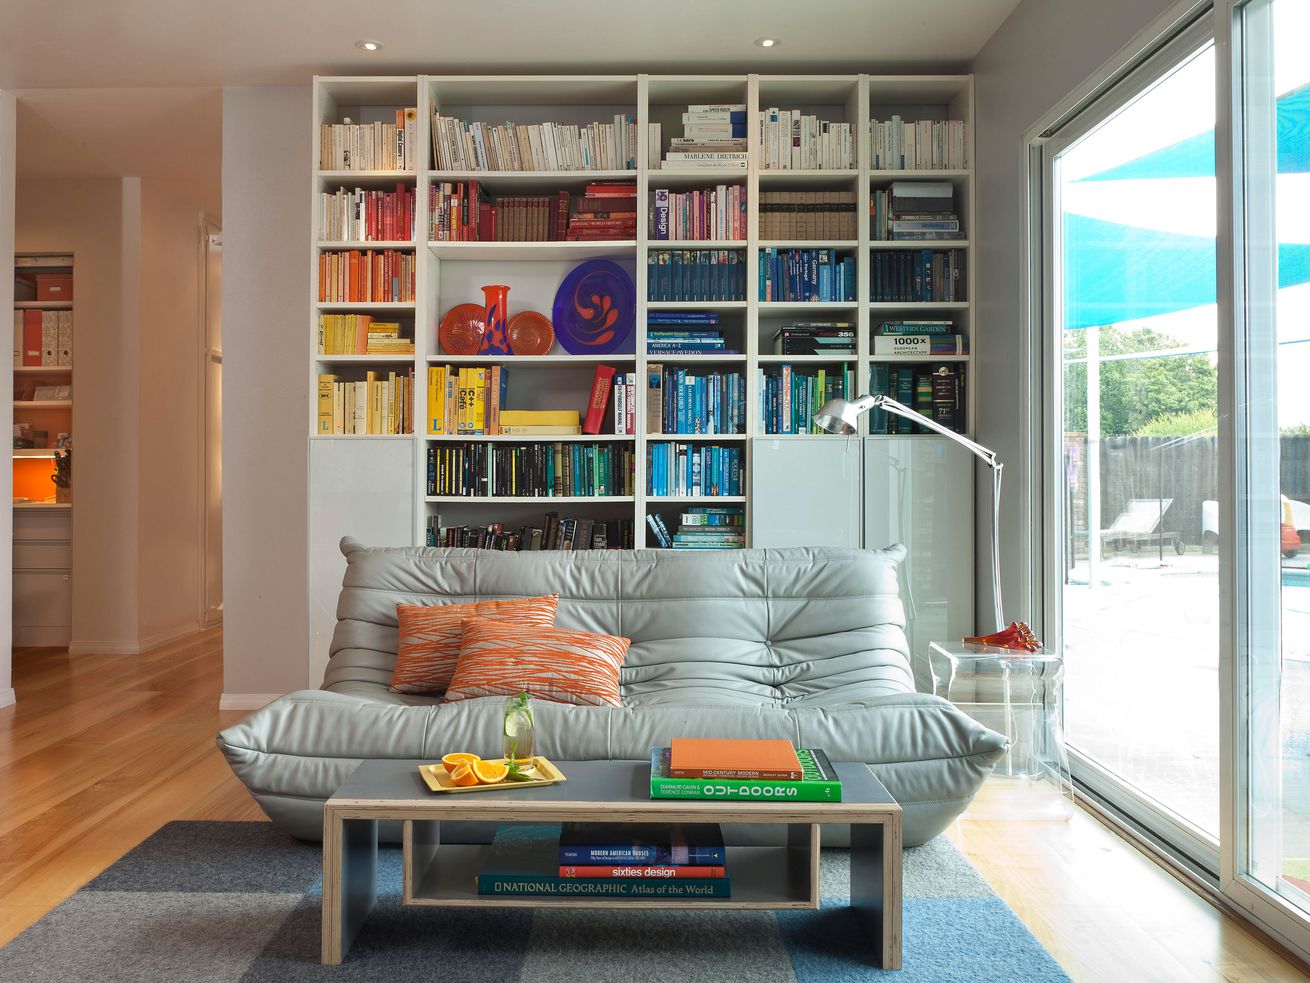 A modern living room with a library full of books that are color coordinated in a rainbow spectrum.